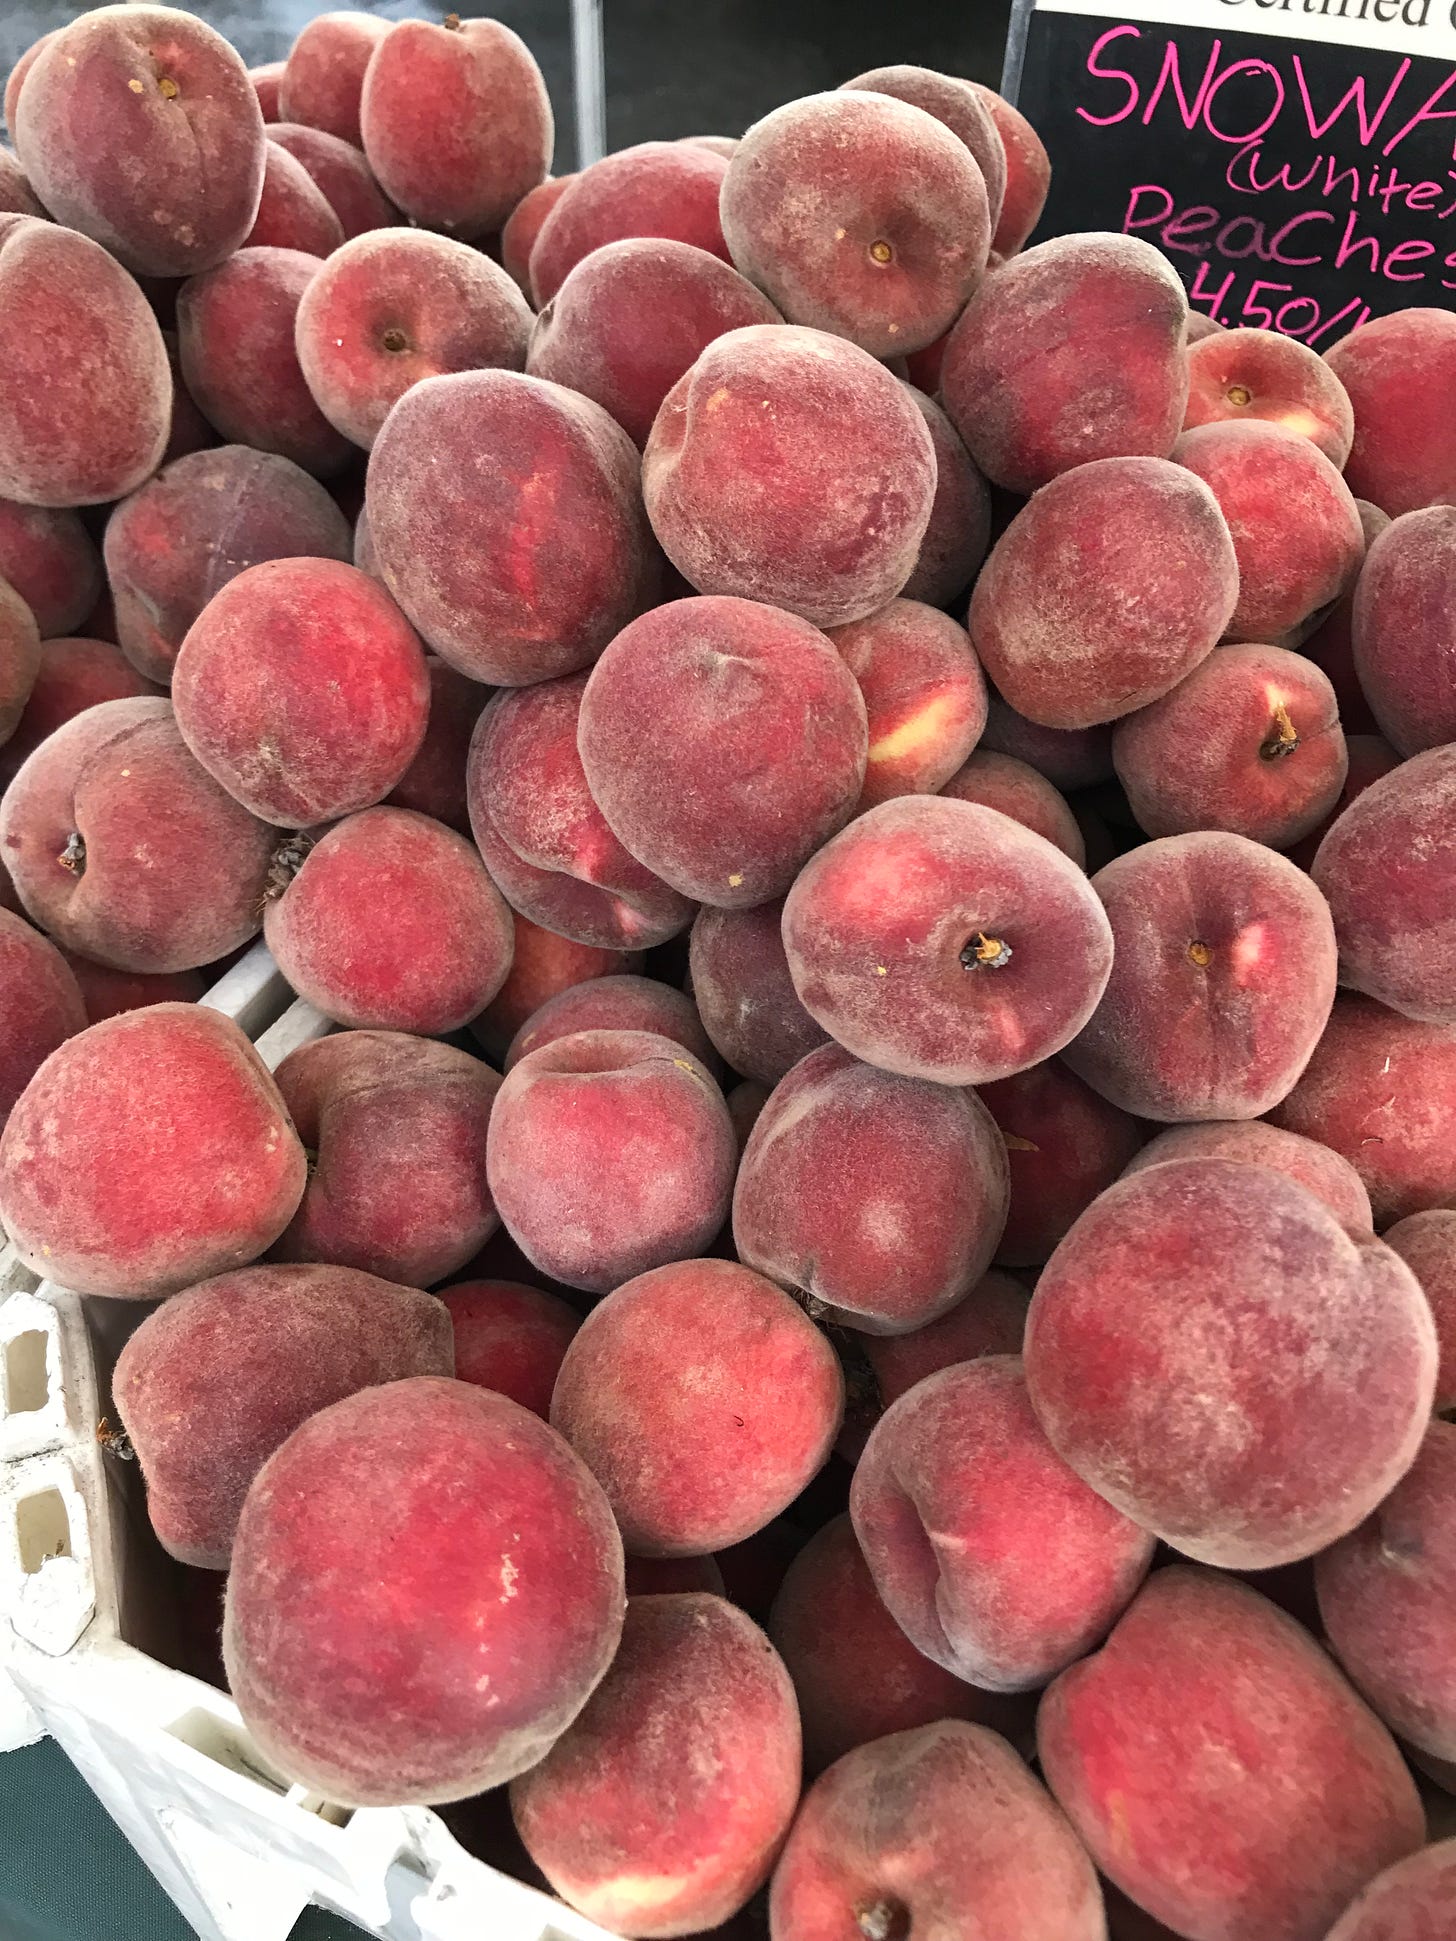 bin of peaches at a market stand